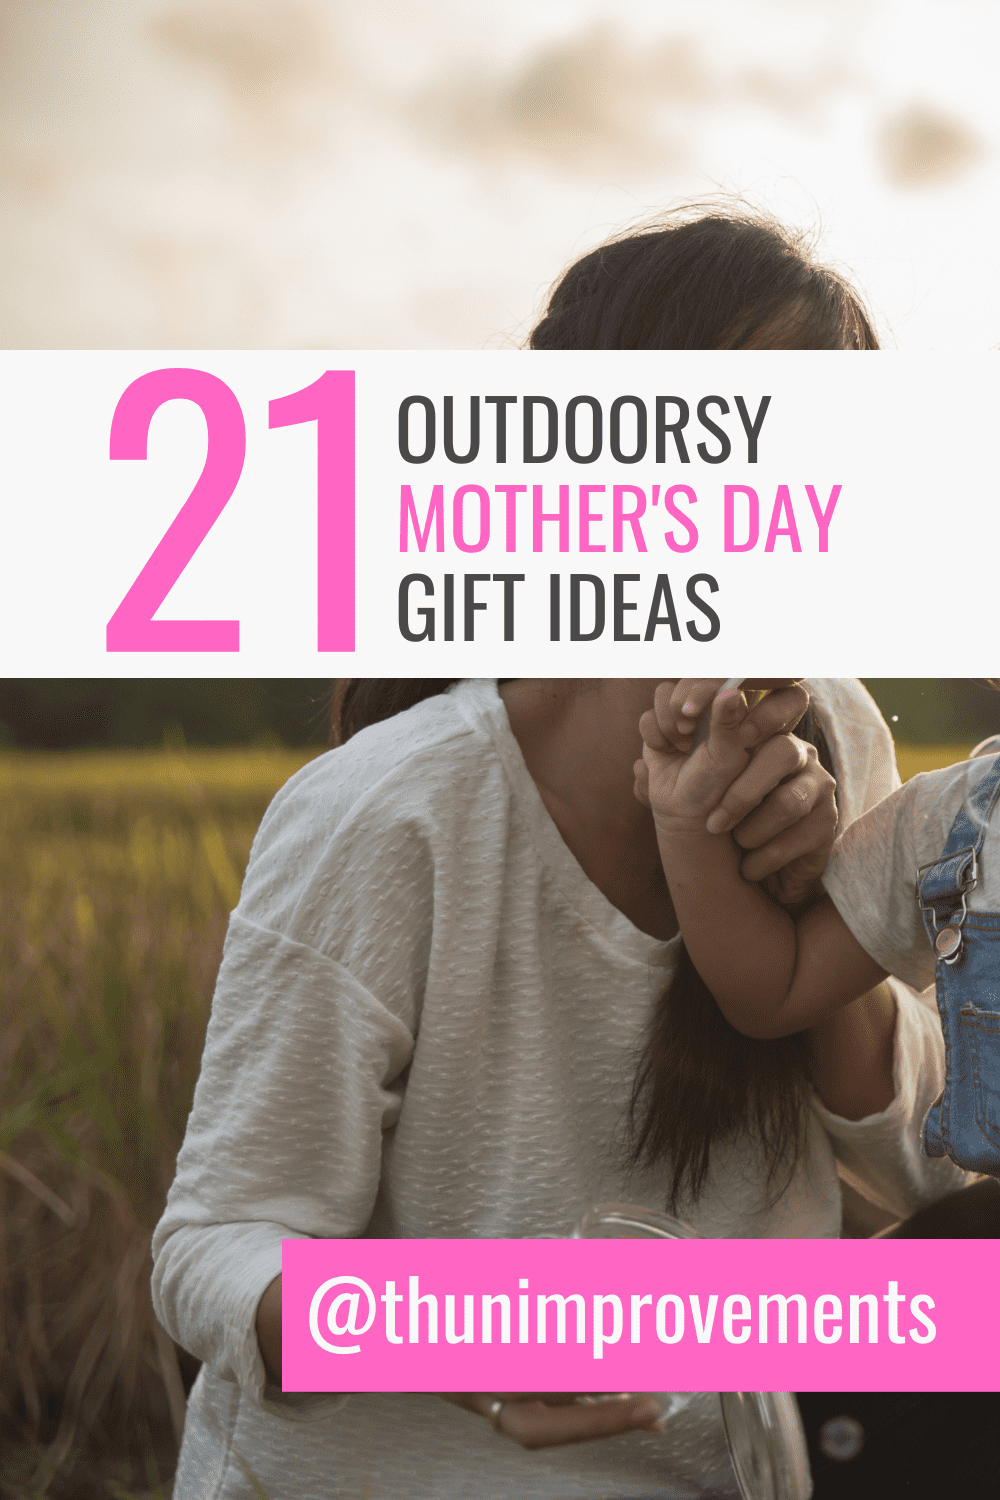 Best Outdoorsy Mother's Day Gifts - Thun Improvements